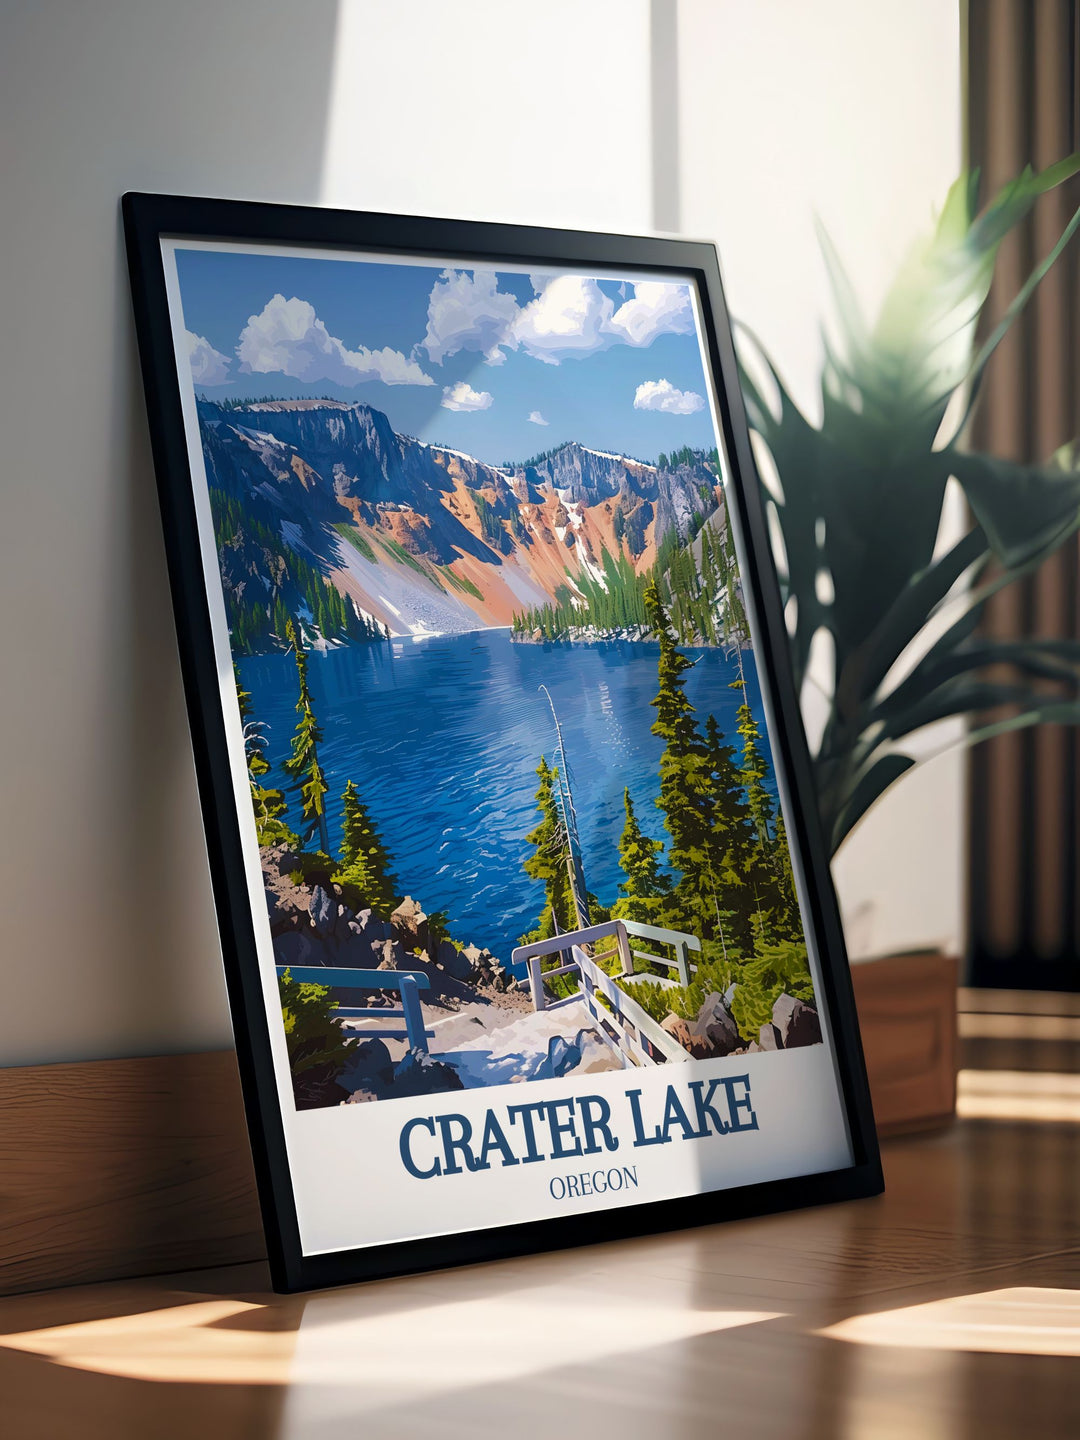 The combination of adventure at Cleetwood Cove and the scenic beauty of Wizard Island is beautifully captured in this vintage travel poster, making it a stunning addition to any wall art collection celebrating national parks.